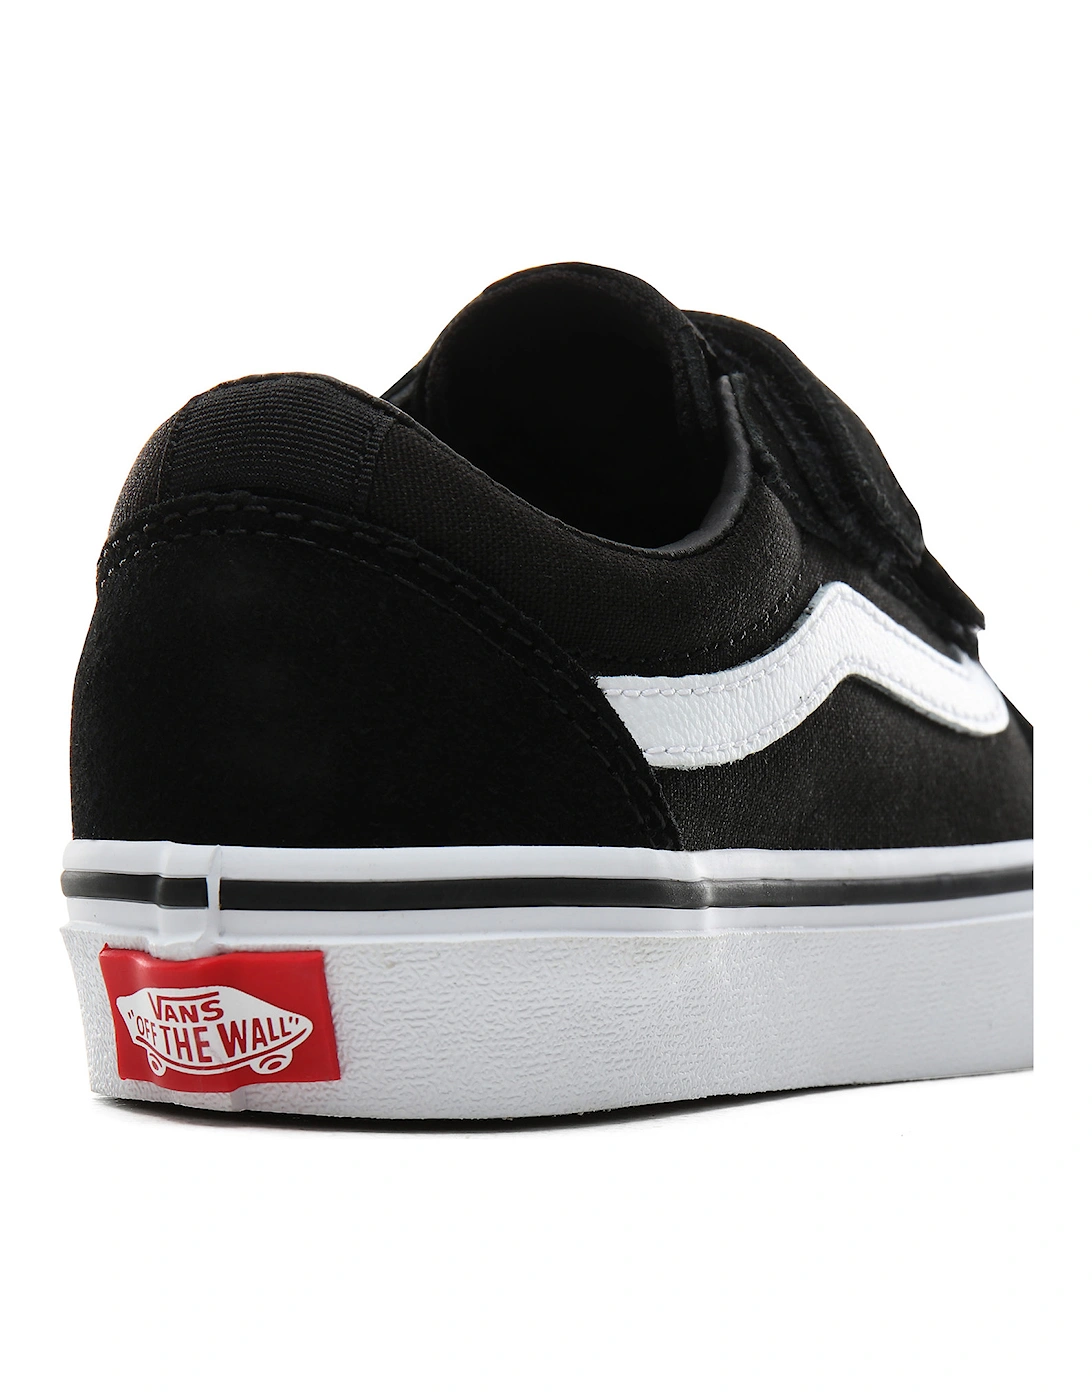 Ward Youths Suede Trainers (Black White)